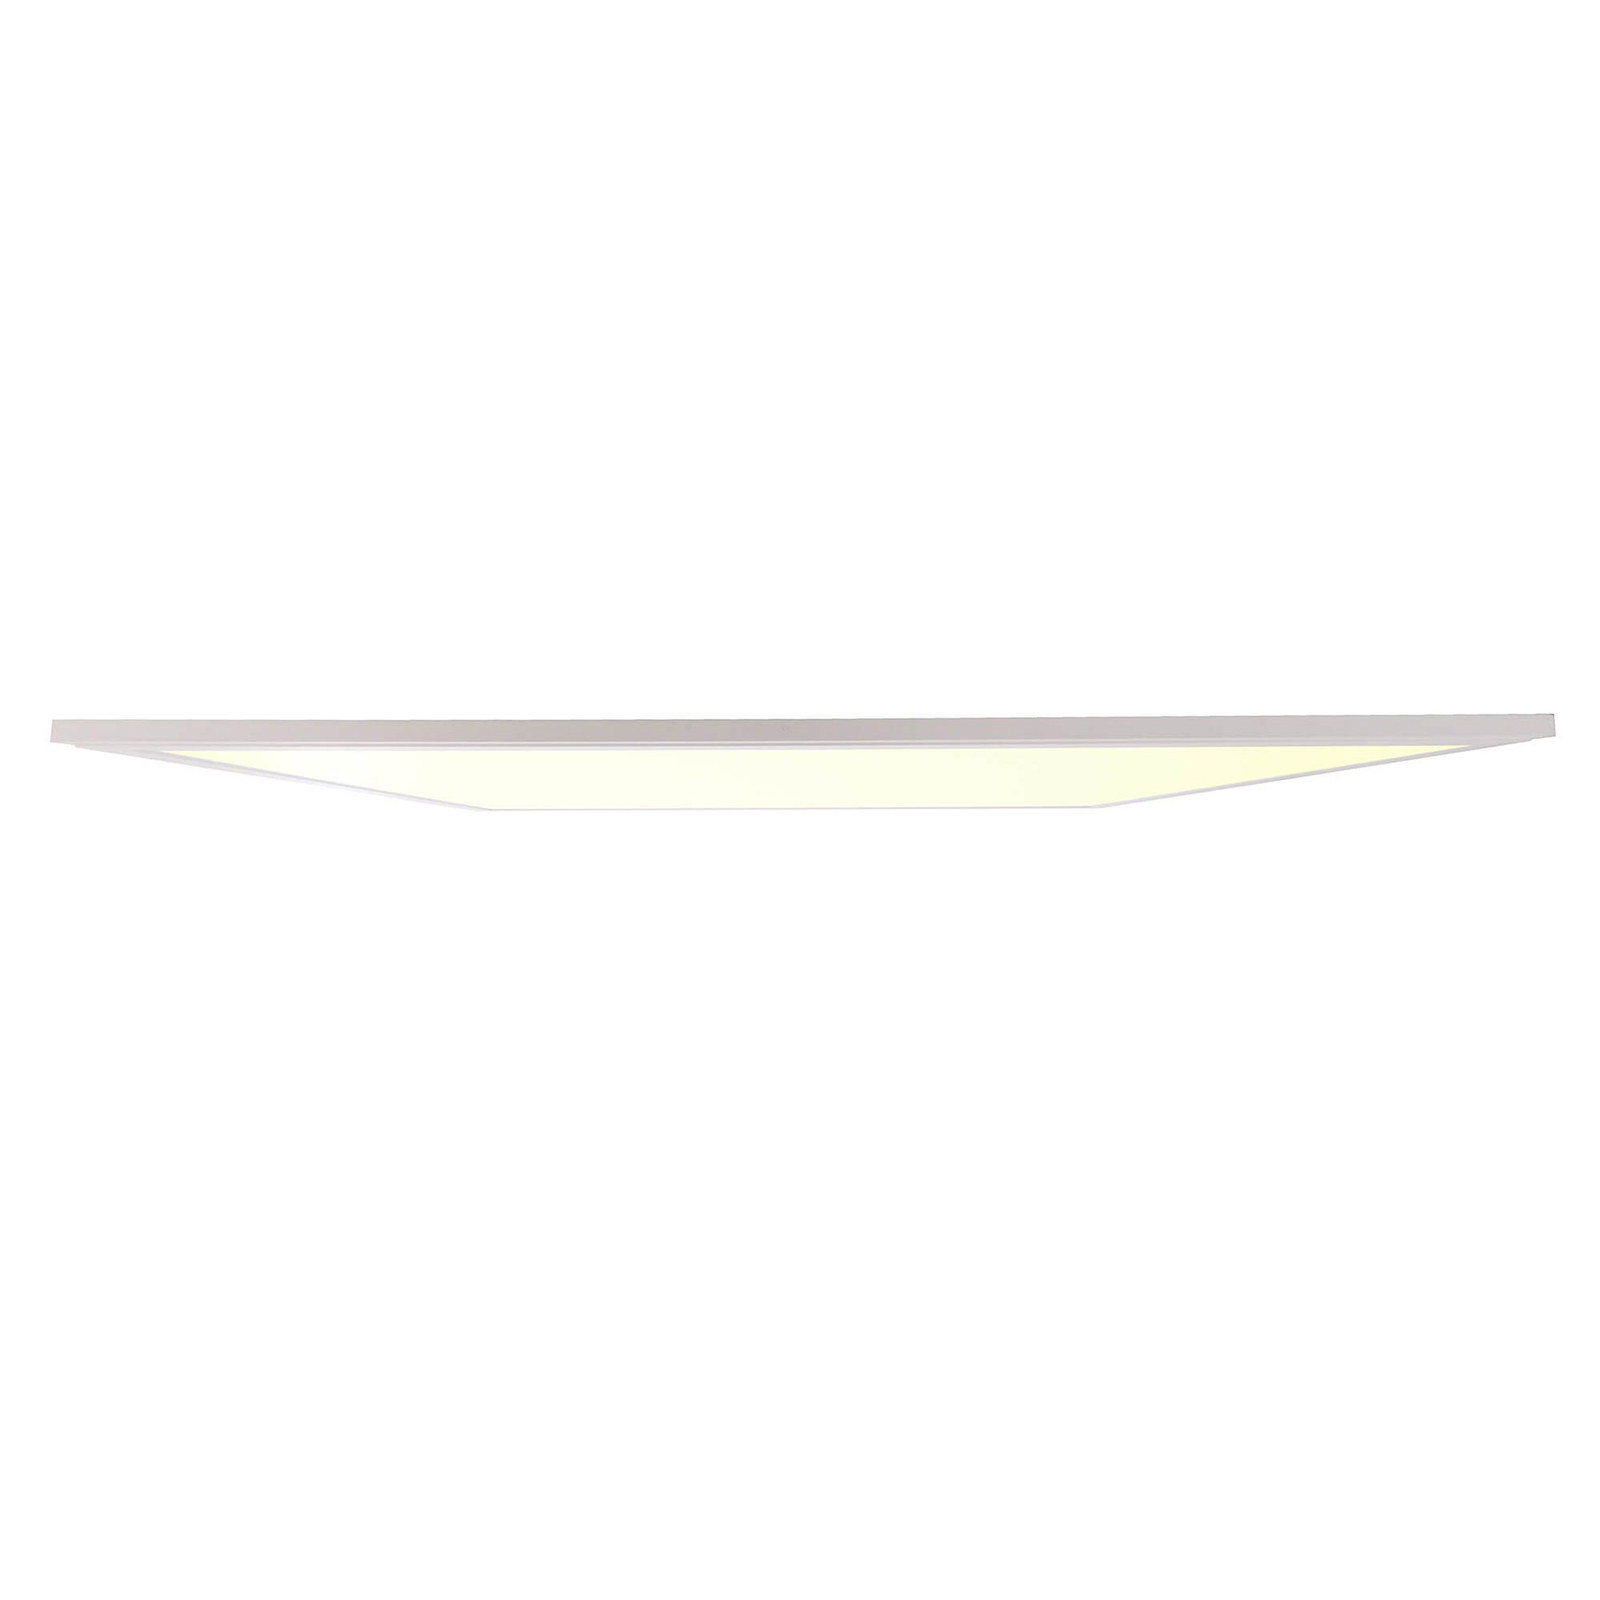 Luminaire à trame LED 100032, dimmable 3000-5500K